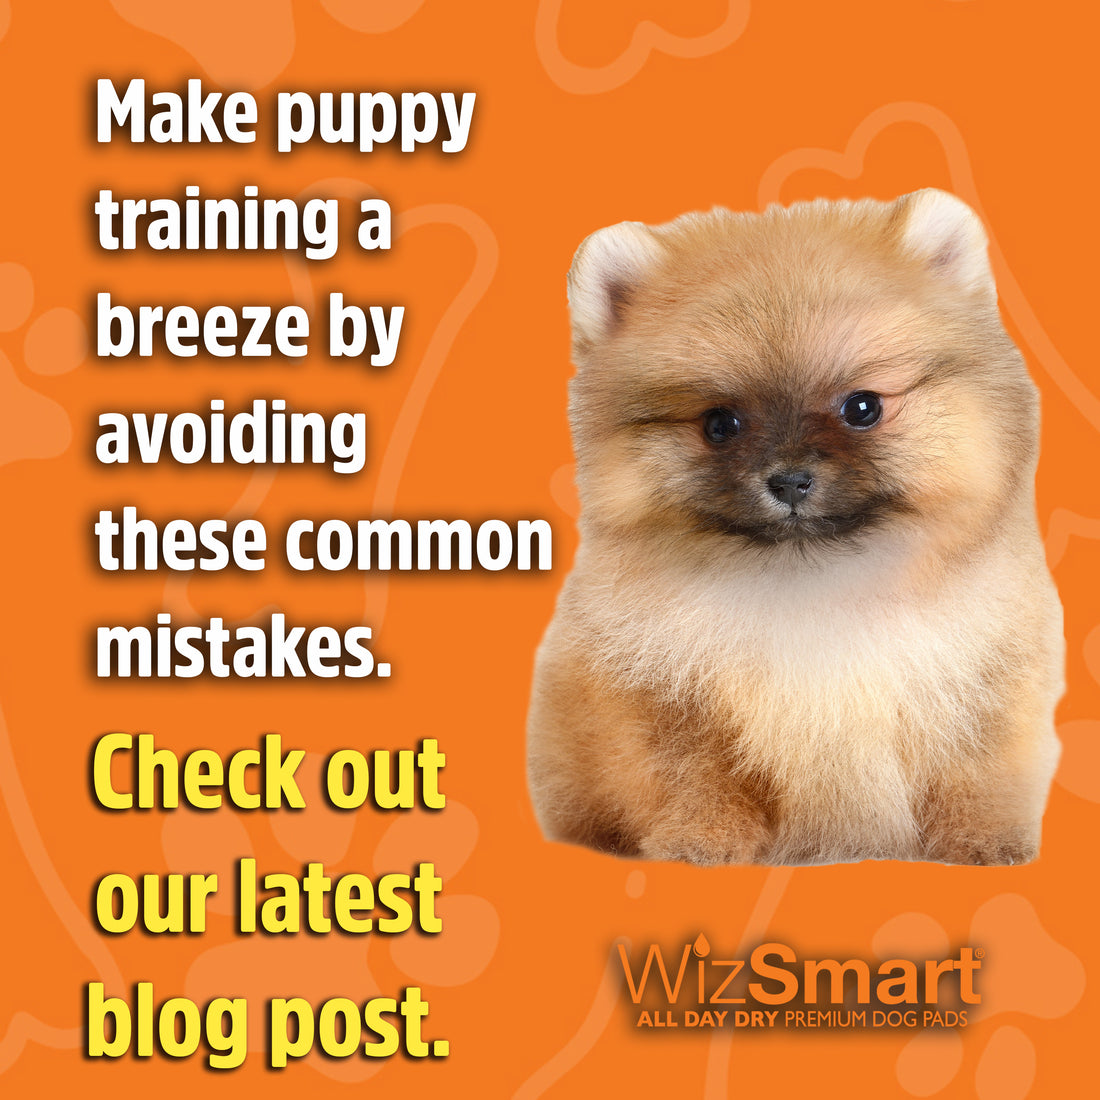 8 Dog Pad Training Mistakes to Avoid